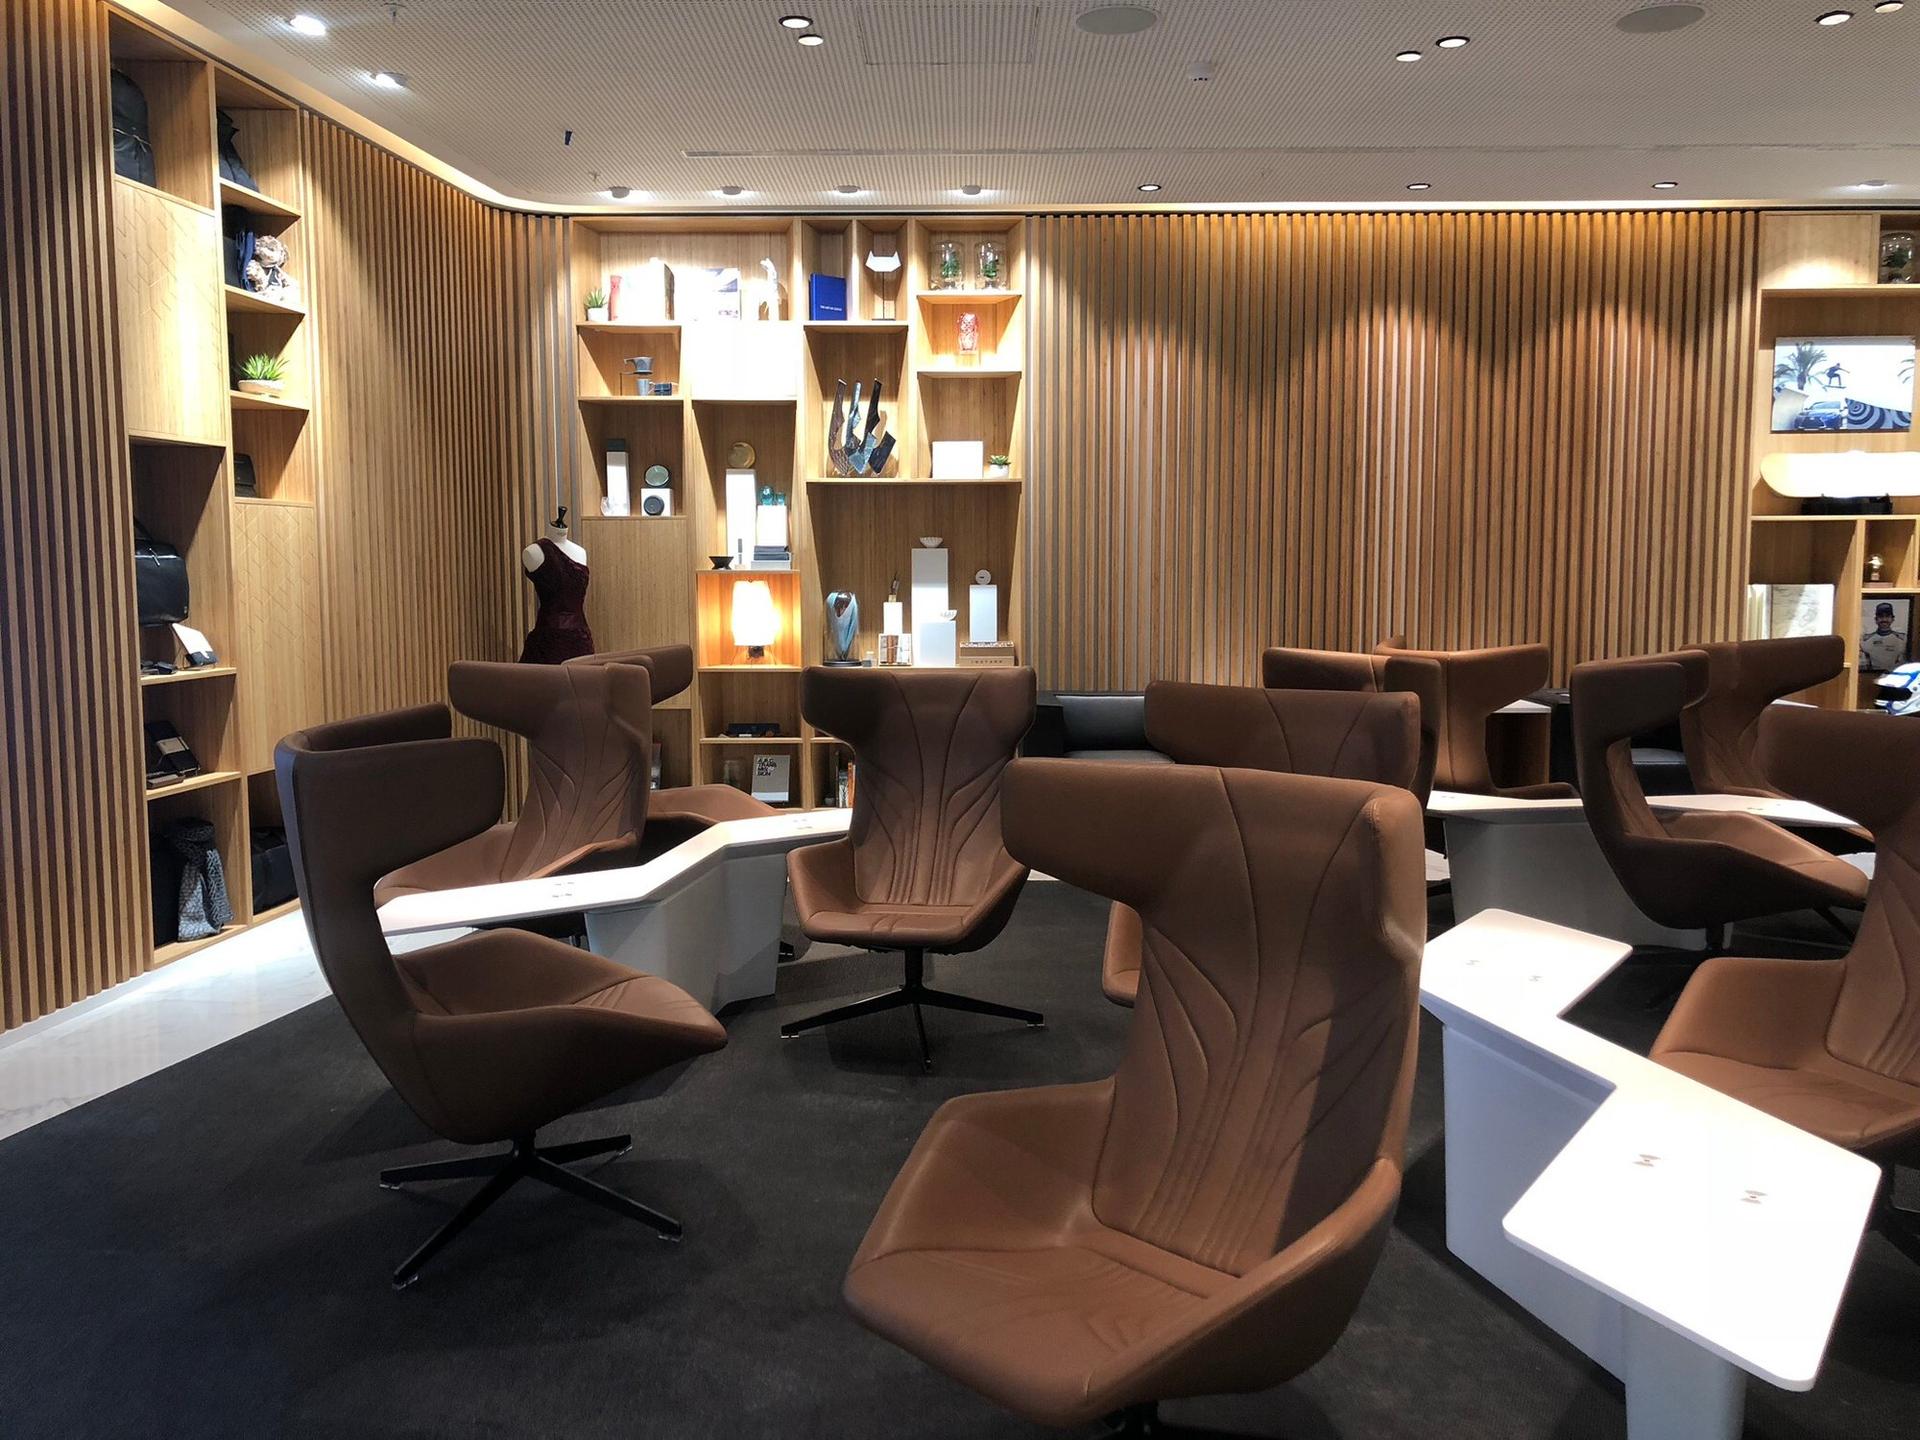 The Loft by Brussels Airlines and Lounge by Lexus image 16 of 23